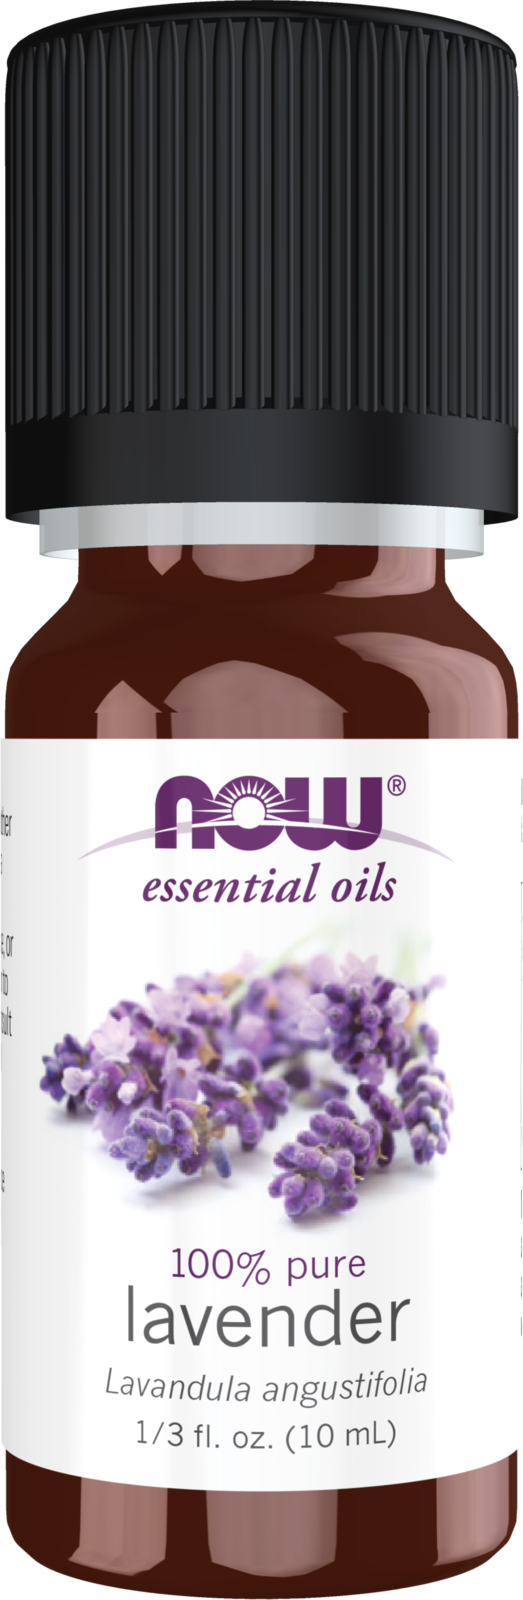 NOW Essential Oils, Lavender Oil, Soothing Aromatherapy Scent, Steam  Distilled, 100% Pure, Vegan, Child Resistant Cap, 4-Ounce